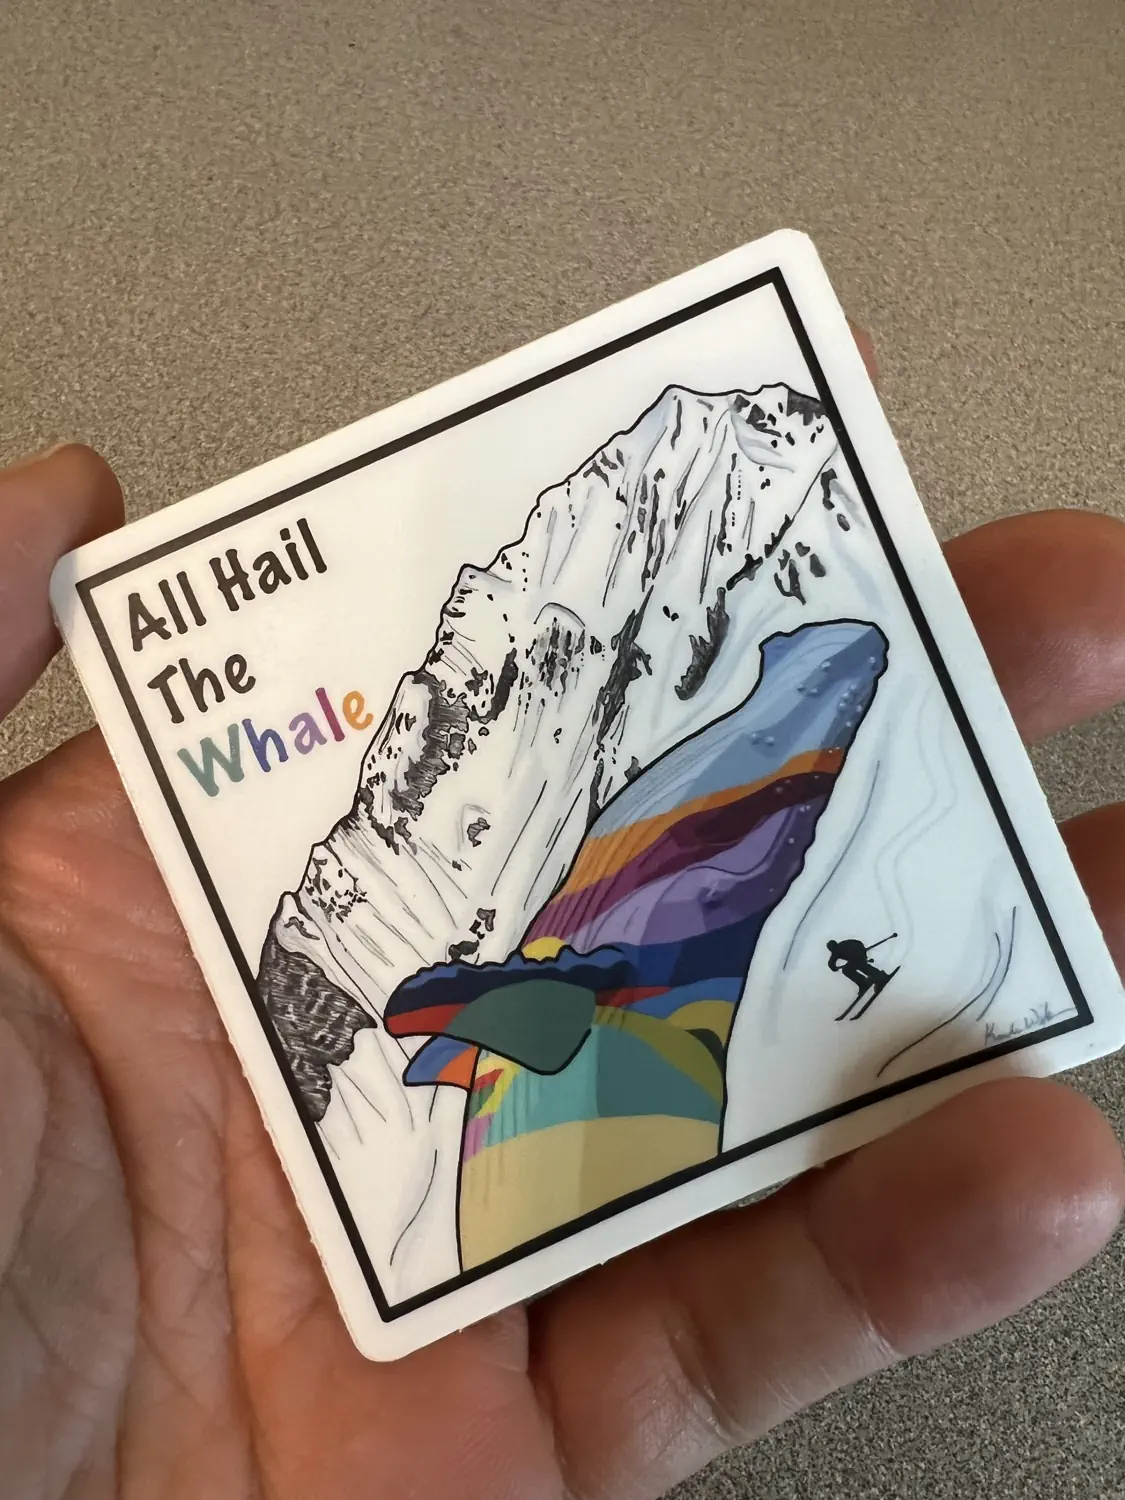 Keith is holding an "All Hail the Whale" sticker which celebrates the incredible snow in Utah